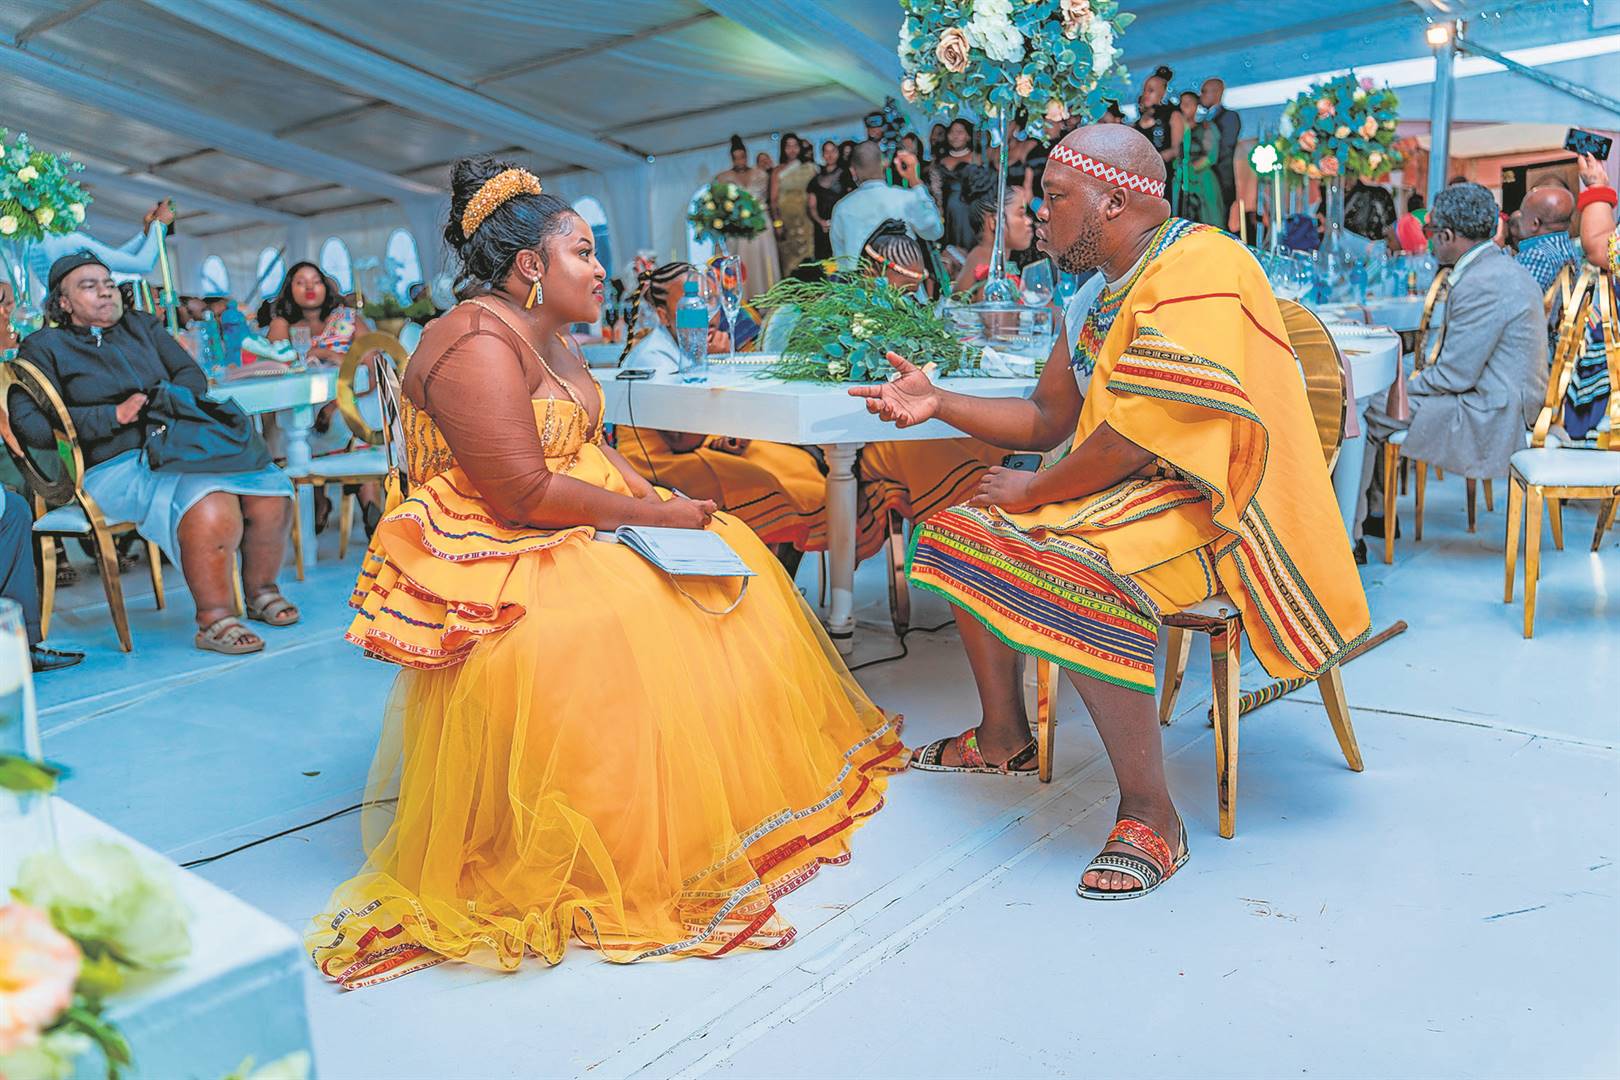 Directors for BOC Event, Nwabisa Wopula and her husband Odwa Wopula celebrated their 18th anniversary in a different style.